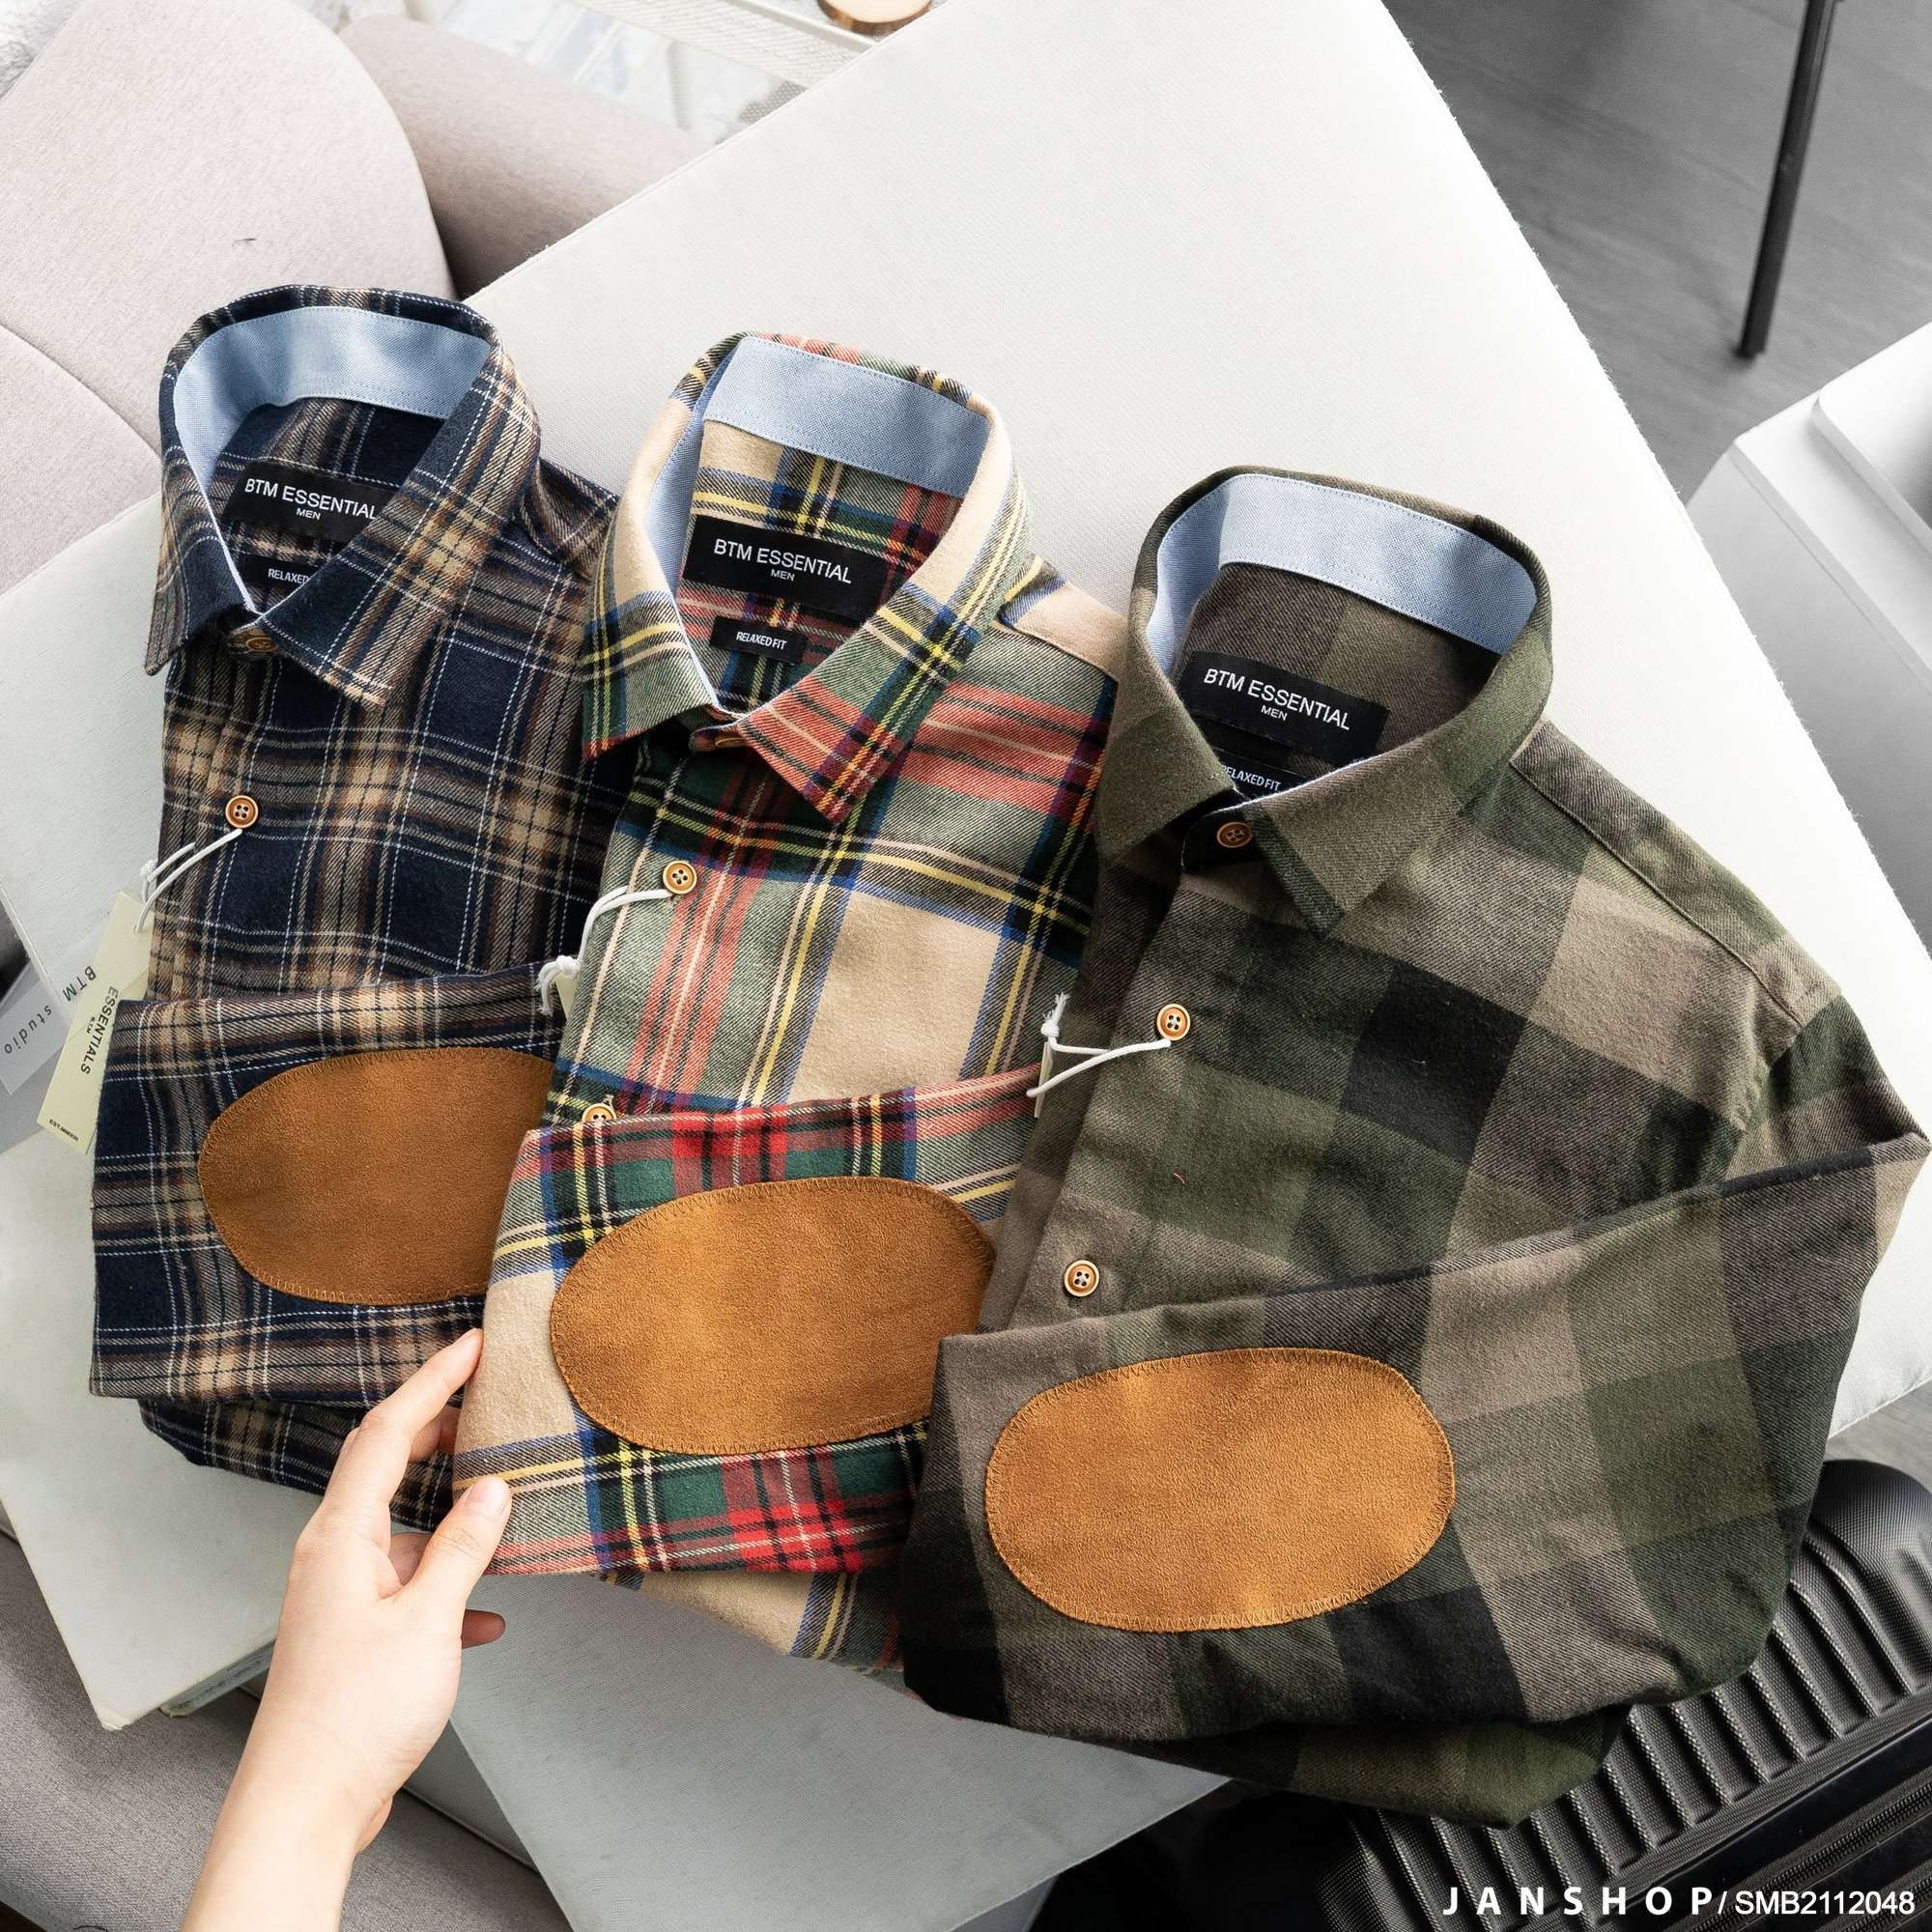 FLANNEL ELBOW PATCH SHIRT